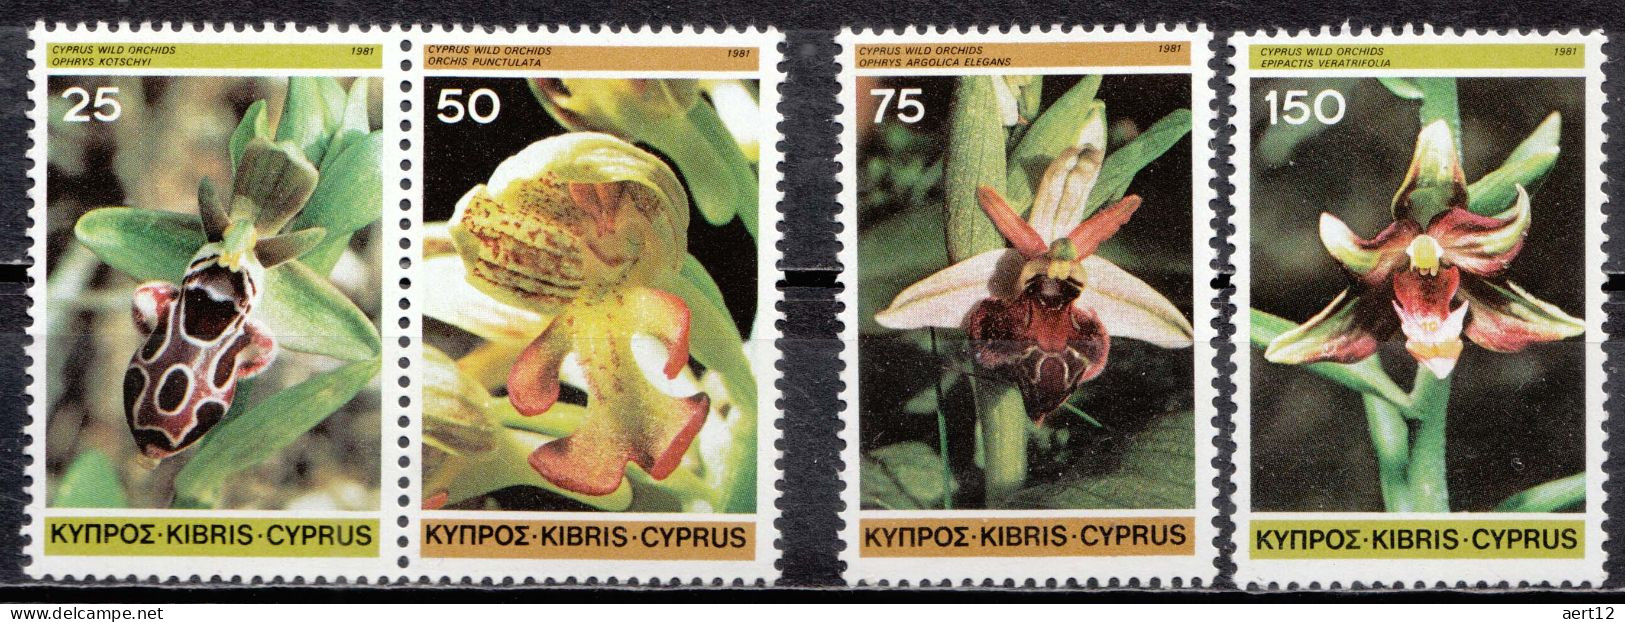 1981, Cyprus, Wild Orchids, Flowers, Orchids, Plants, 4 Stamps, MNH(**), CY 552-55 - Ongebruikt